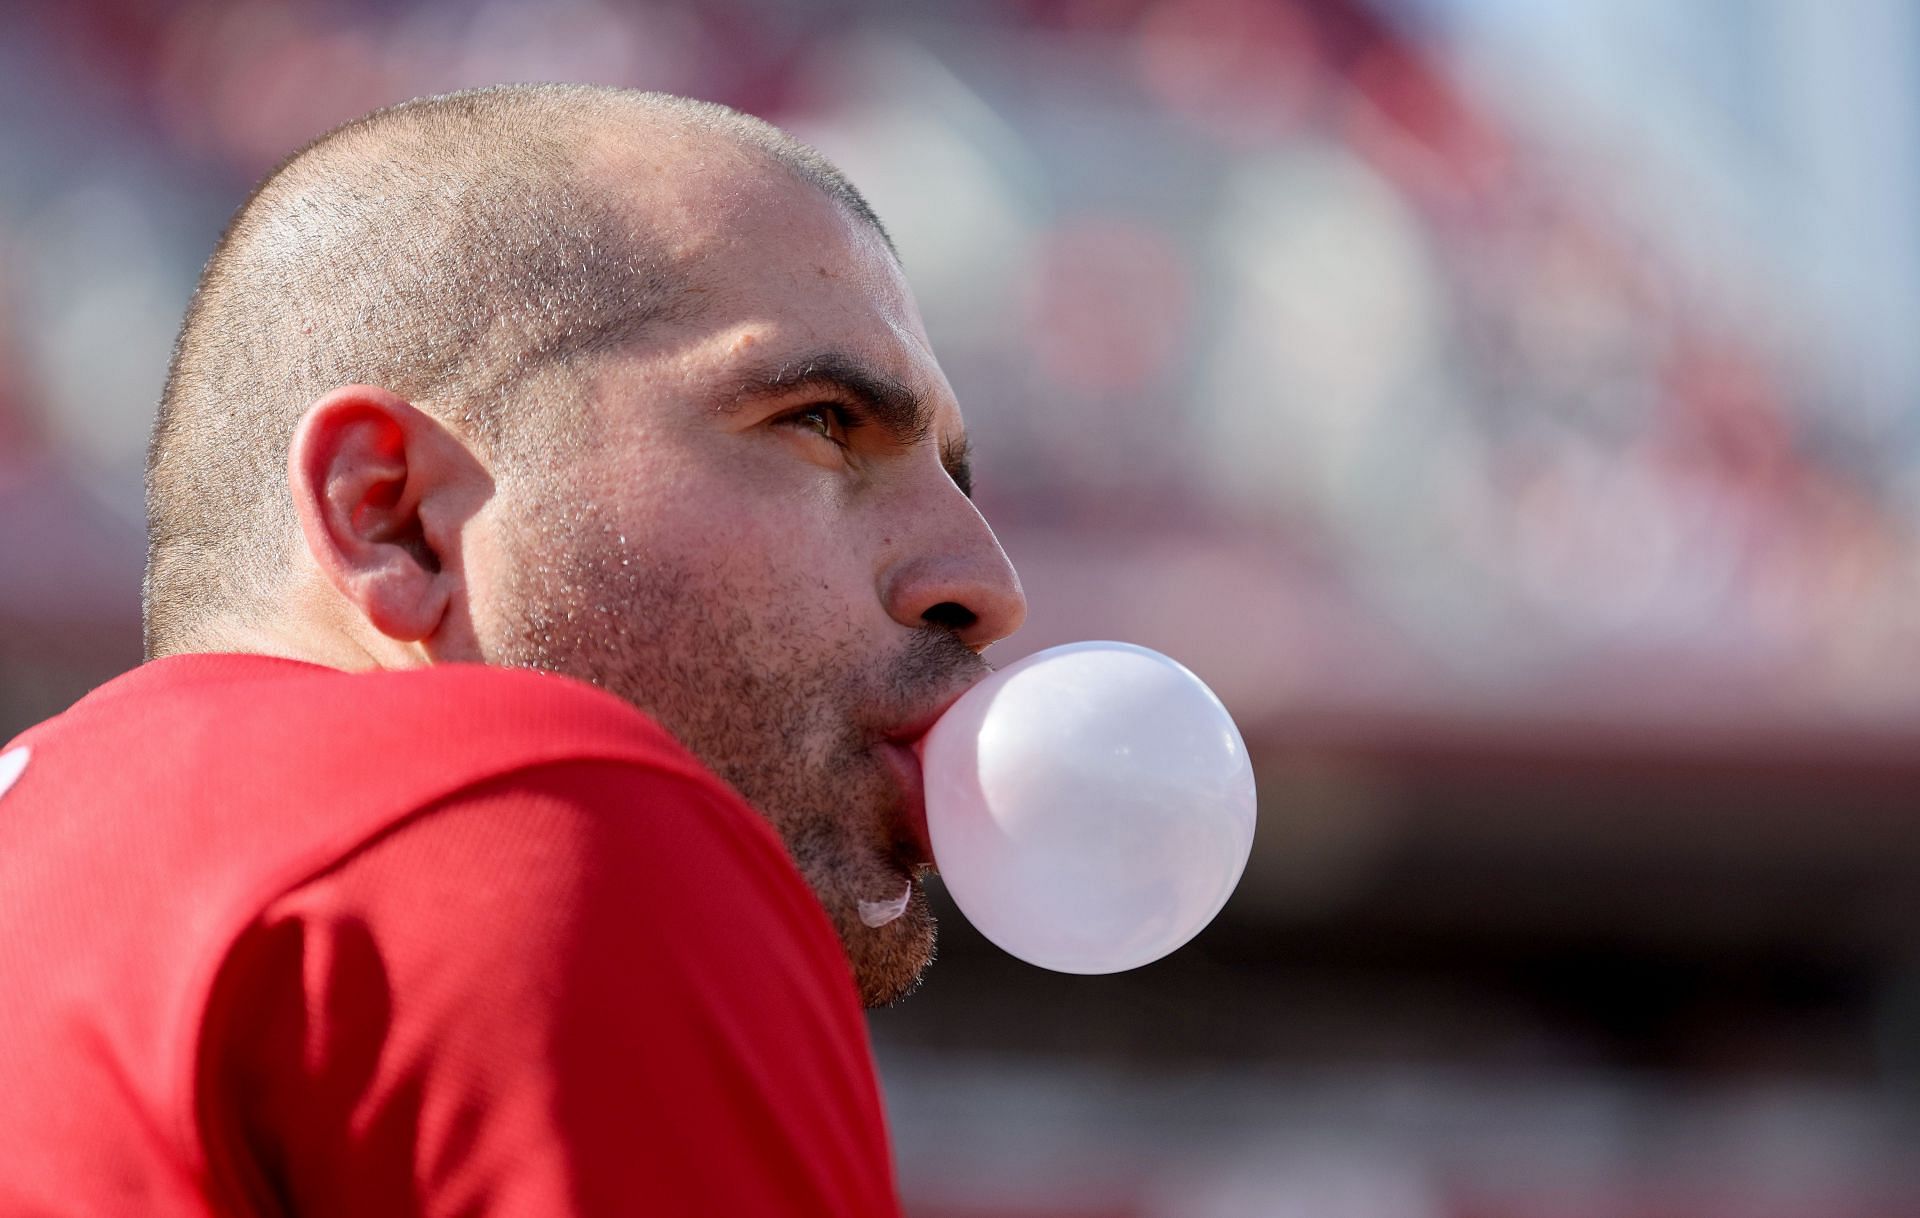 This is going to be a long recovery - Joey Votto's concerning